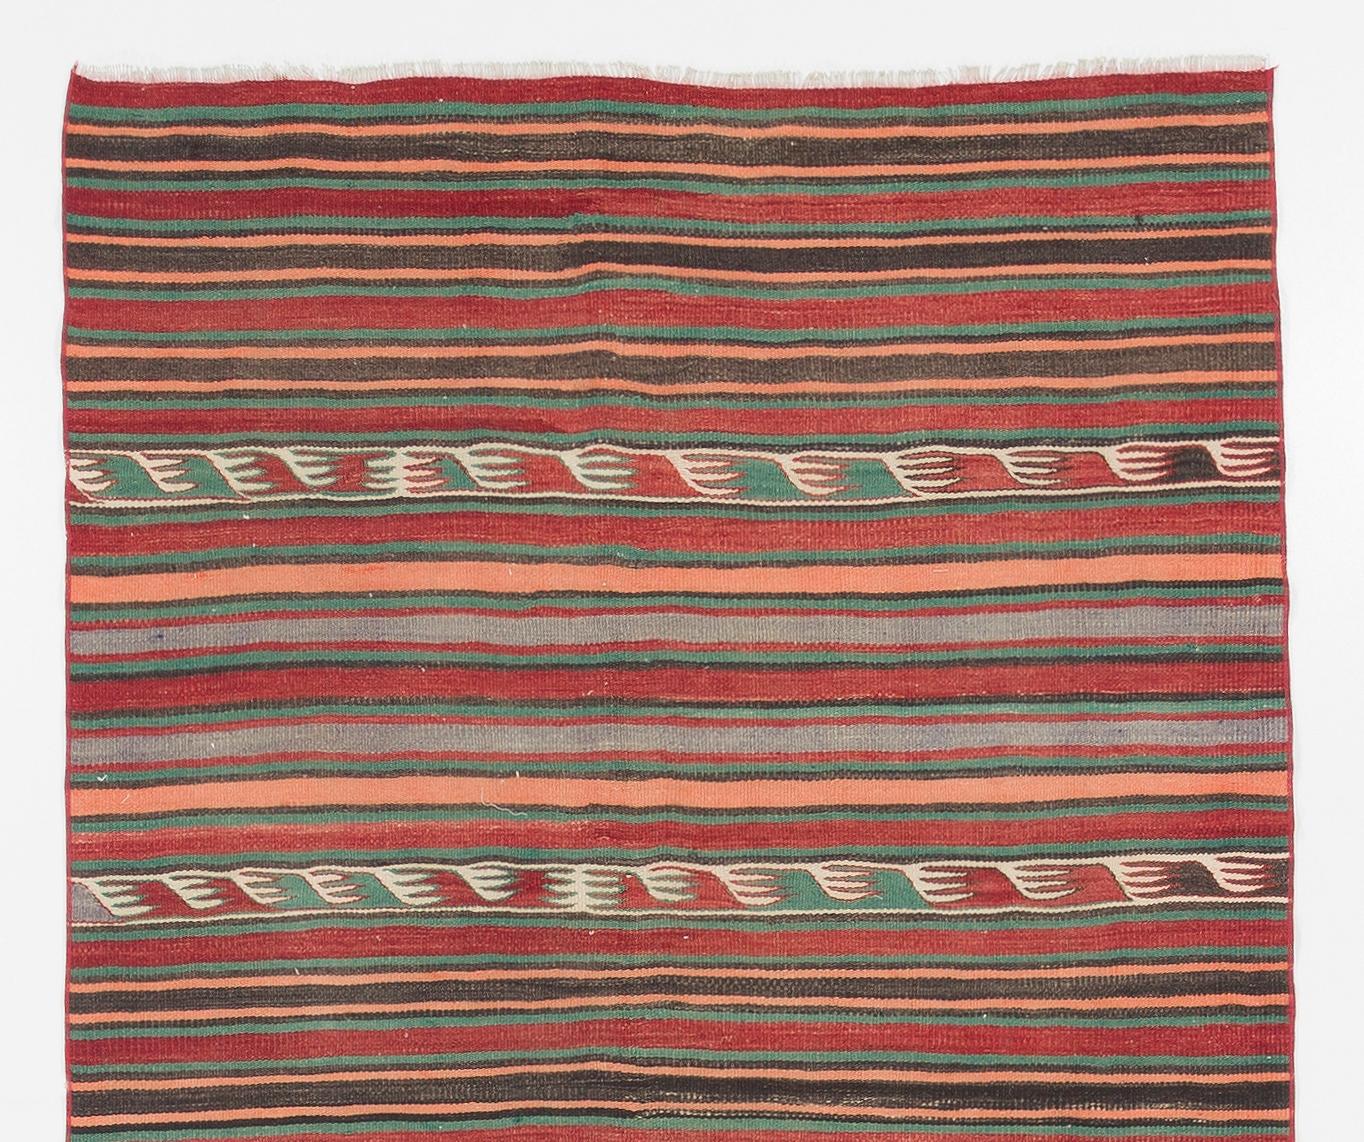 Vintage handwoven flat-weave (Kilim) with striped design, 100% wool. Size: 4.3 x 11.4 Ft.
Reversible; both sides can be used.
Ideal for both residential and commercial interiors.
We can supply a suitable rug-pad if requested for extra cushioning and